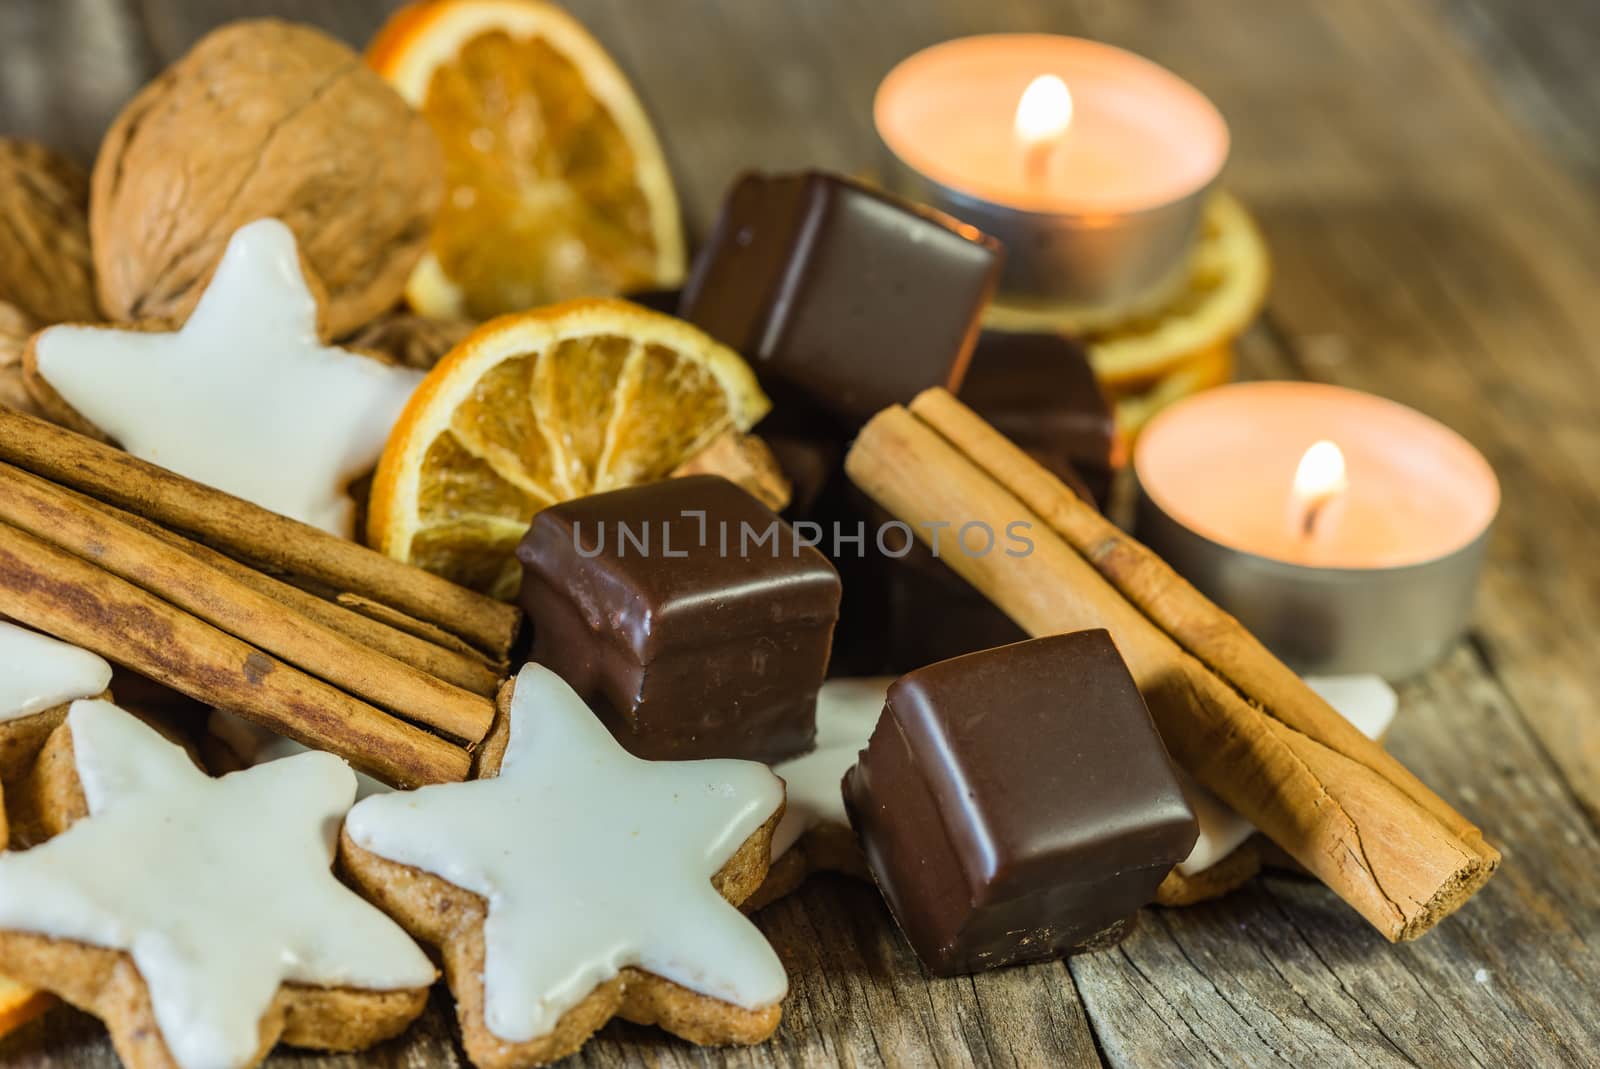 Advent and Christmas composition of star shape biscuits, chocolate, cinnamon, nuts, orange slices and candles